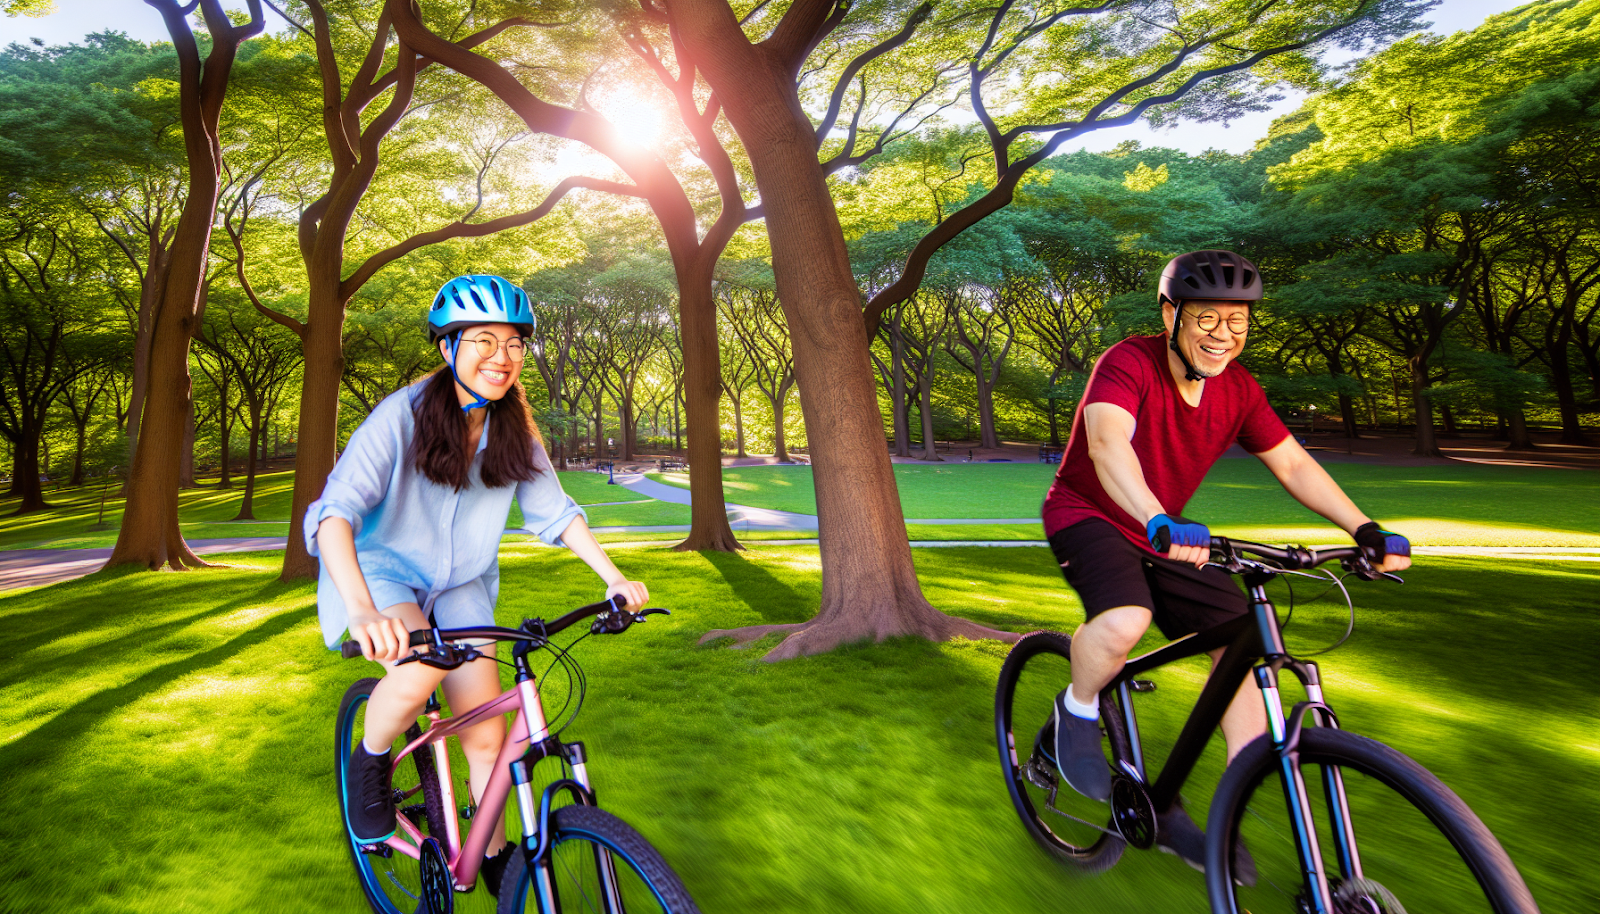 Couple riding bicycles in the park as sober date activity